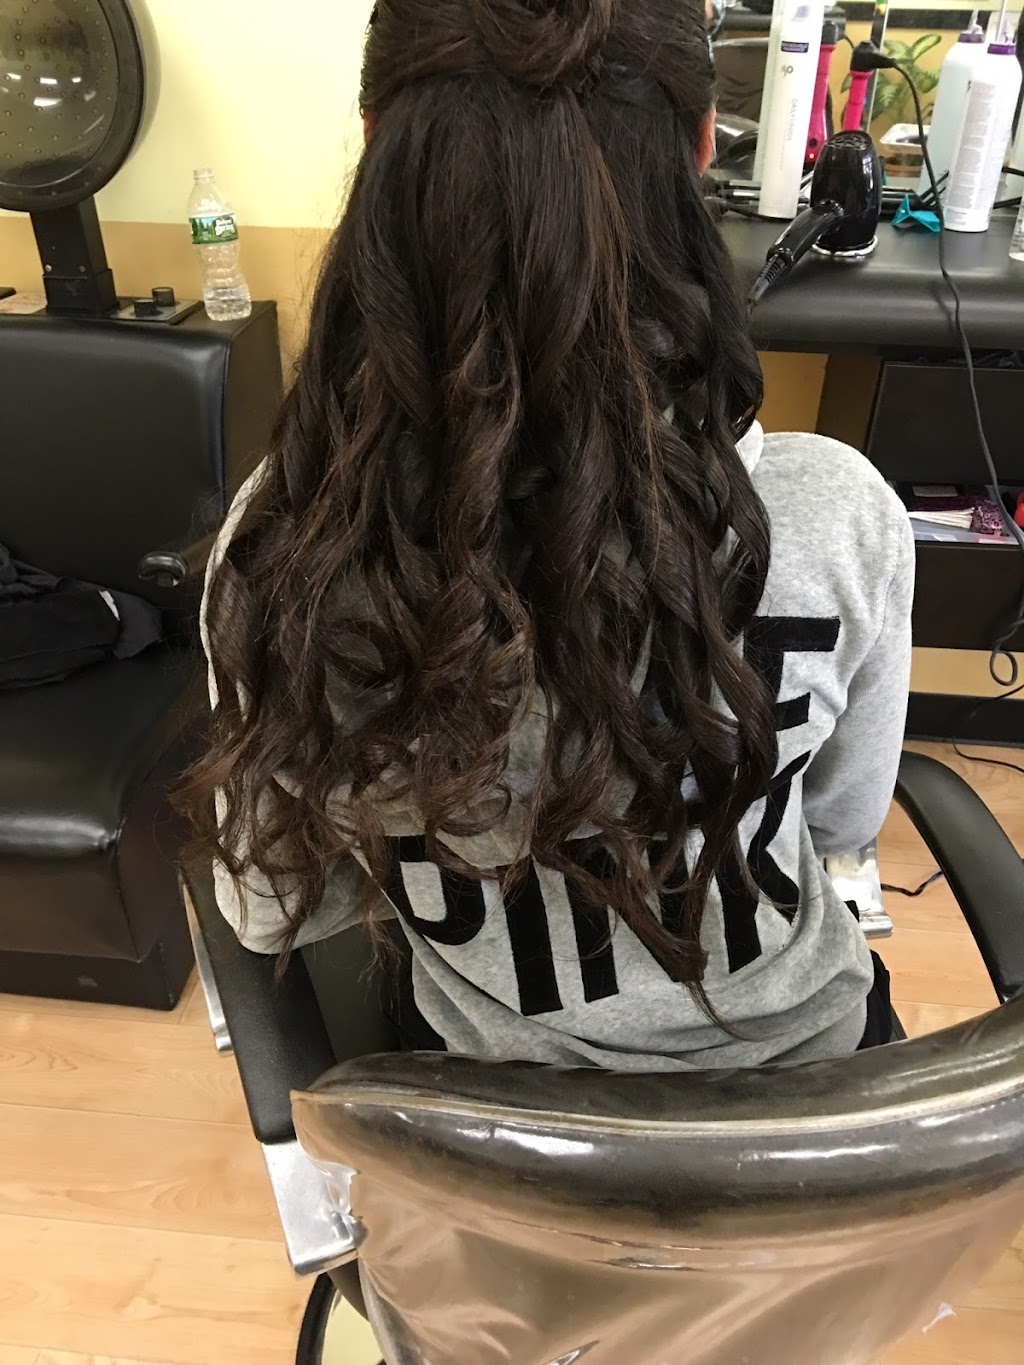 Lemon Tree Hair Salon Middle Island | 1275 Middle Country Rd, Middle Island, NY 11953 | Phone: (631) 345-2086